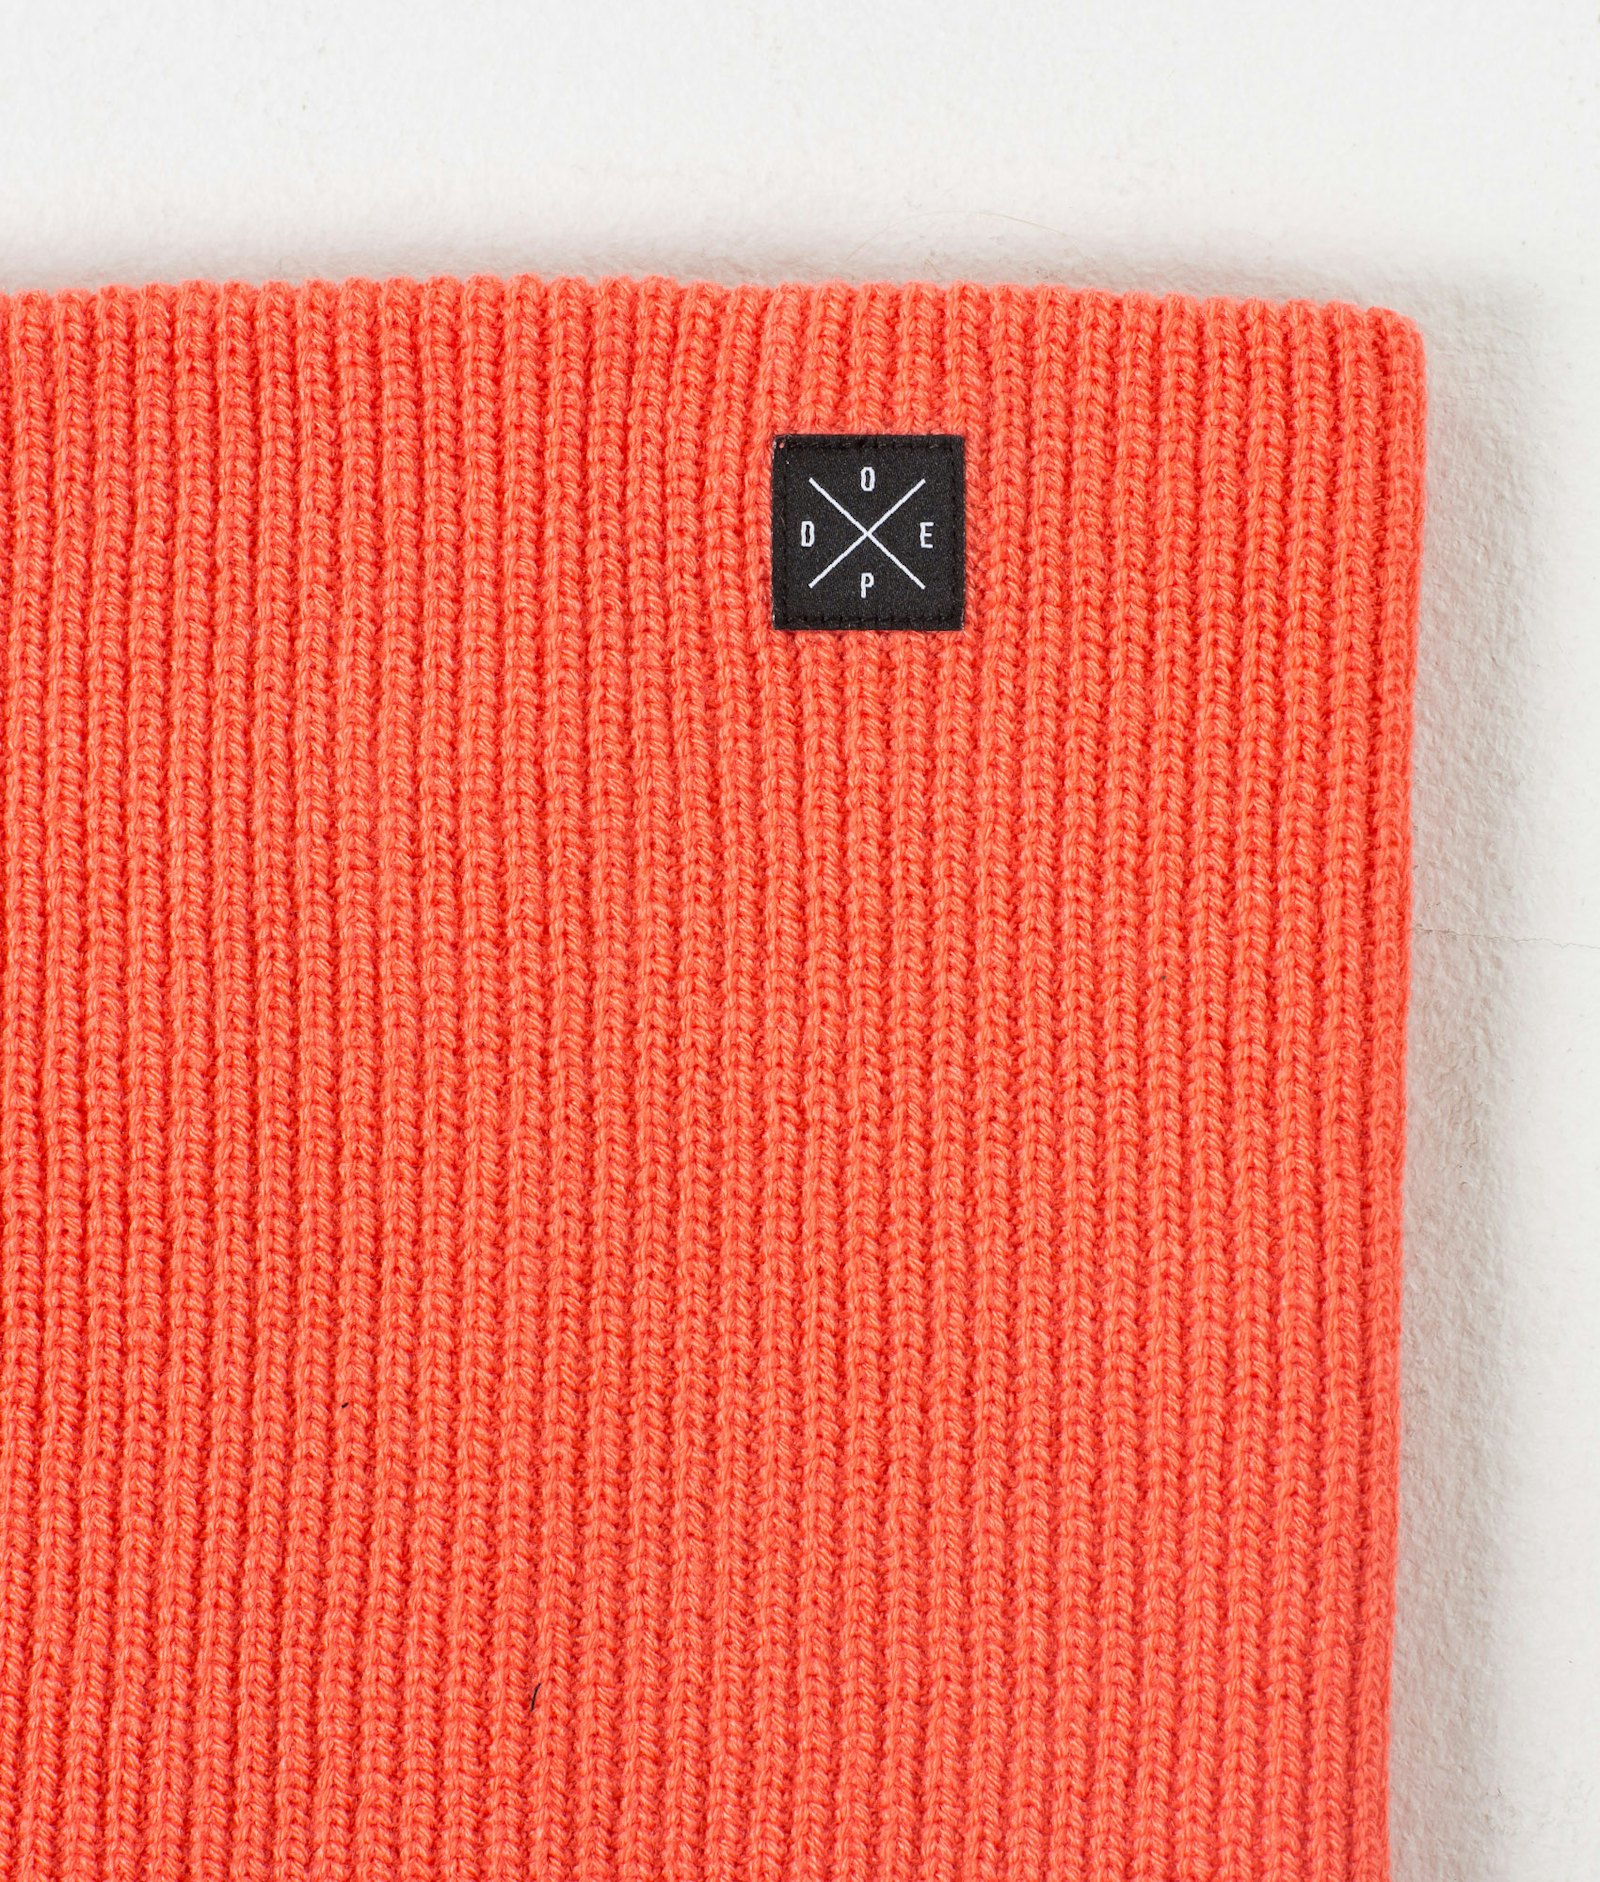 2X-UP Knitted Schlauchtuch Coral